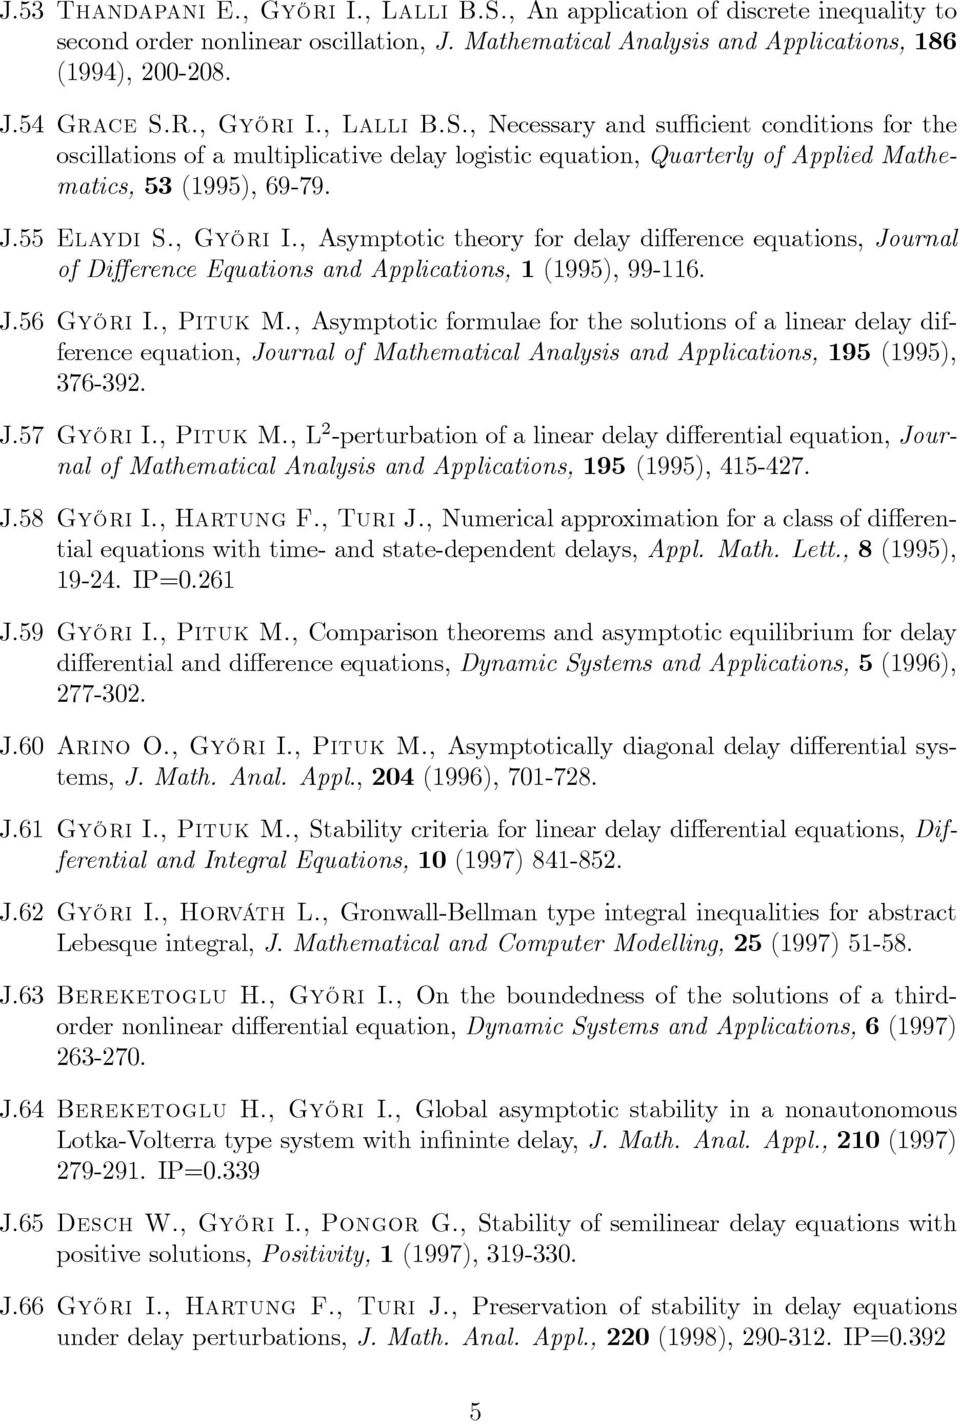 , Gy½Ori I., Asymptotic theory for delay di erence equations, Journal of Di erence Equations and Applications, 1 (1995), 99-116. J.56 Gy½Ori I., Pituk M.